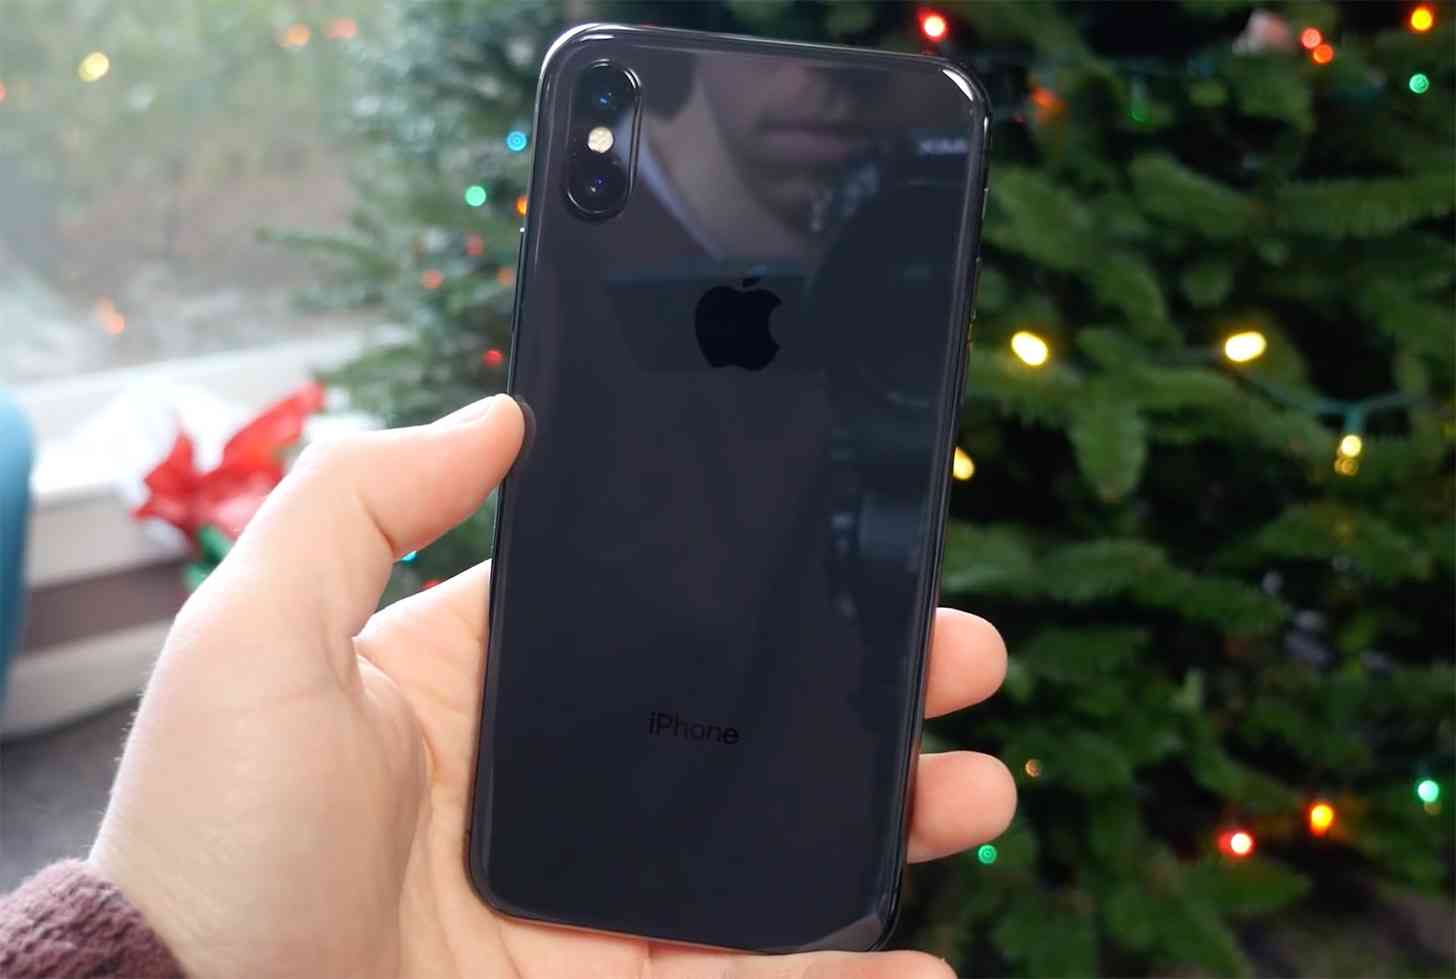 iPhone X hands-on rear